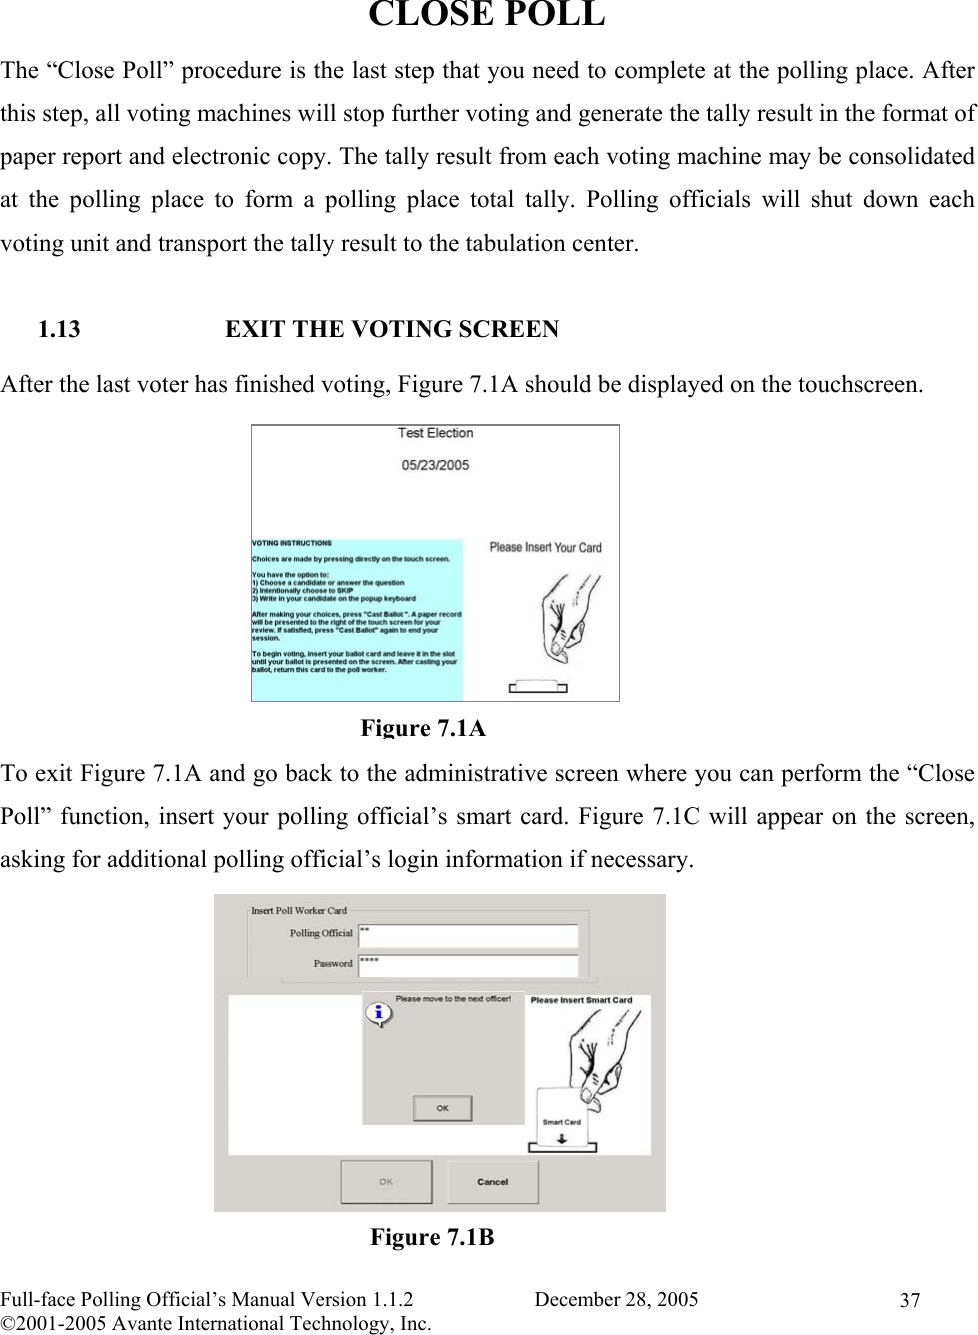    Full-face Polling Official’s Manual Version 1.1.2                       December 28, 2005 ©2001-2005 Avante International Technology, Inc.   37 CLOSE POLL The “Close Poll” procedure is the last step that you need to complete at the polling place. After this step, all voting machines will stop further voting and generate the tally result in the format of paper report and electronic copy. The tally result from each voting machine may be consolidated at the polling place to form a polling place total tally. Polling officials will shut down each voting unit and transport the tally result to the tabulation center.  1.13  EXIT THE VOTING SCREEN After the last voter has finished voting, Figure 7.1A should be displayed on the touchscreen.         To exit Figure 7.1A and go back to the administrative screen where you can perform the “Close Poll” function, insert your polling official’s smart card. Figure 7.1C will appear on the screen, asking for additional polling official’s login information if necessary.               Figure 7.1B Figure 7.1A